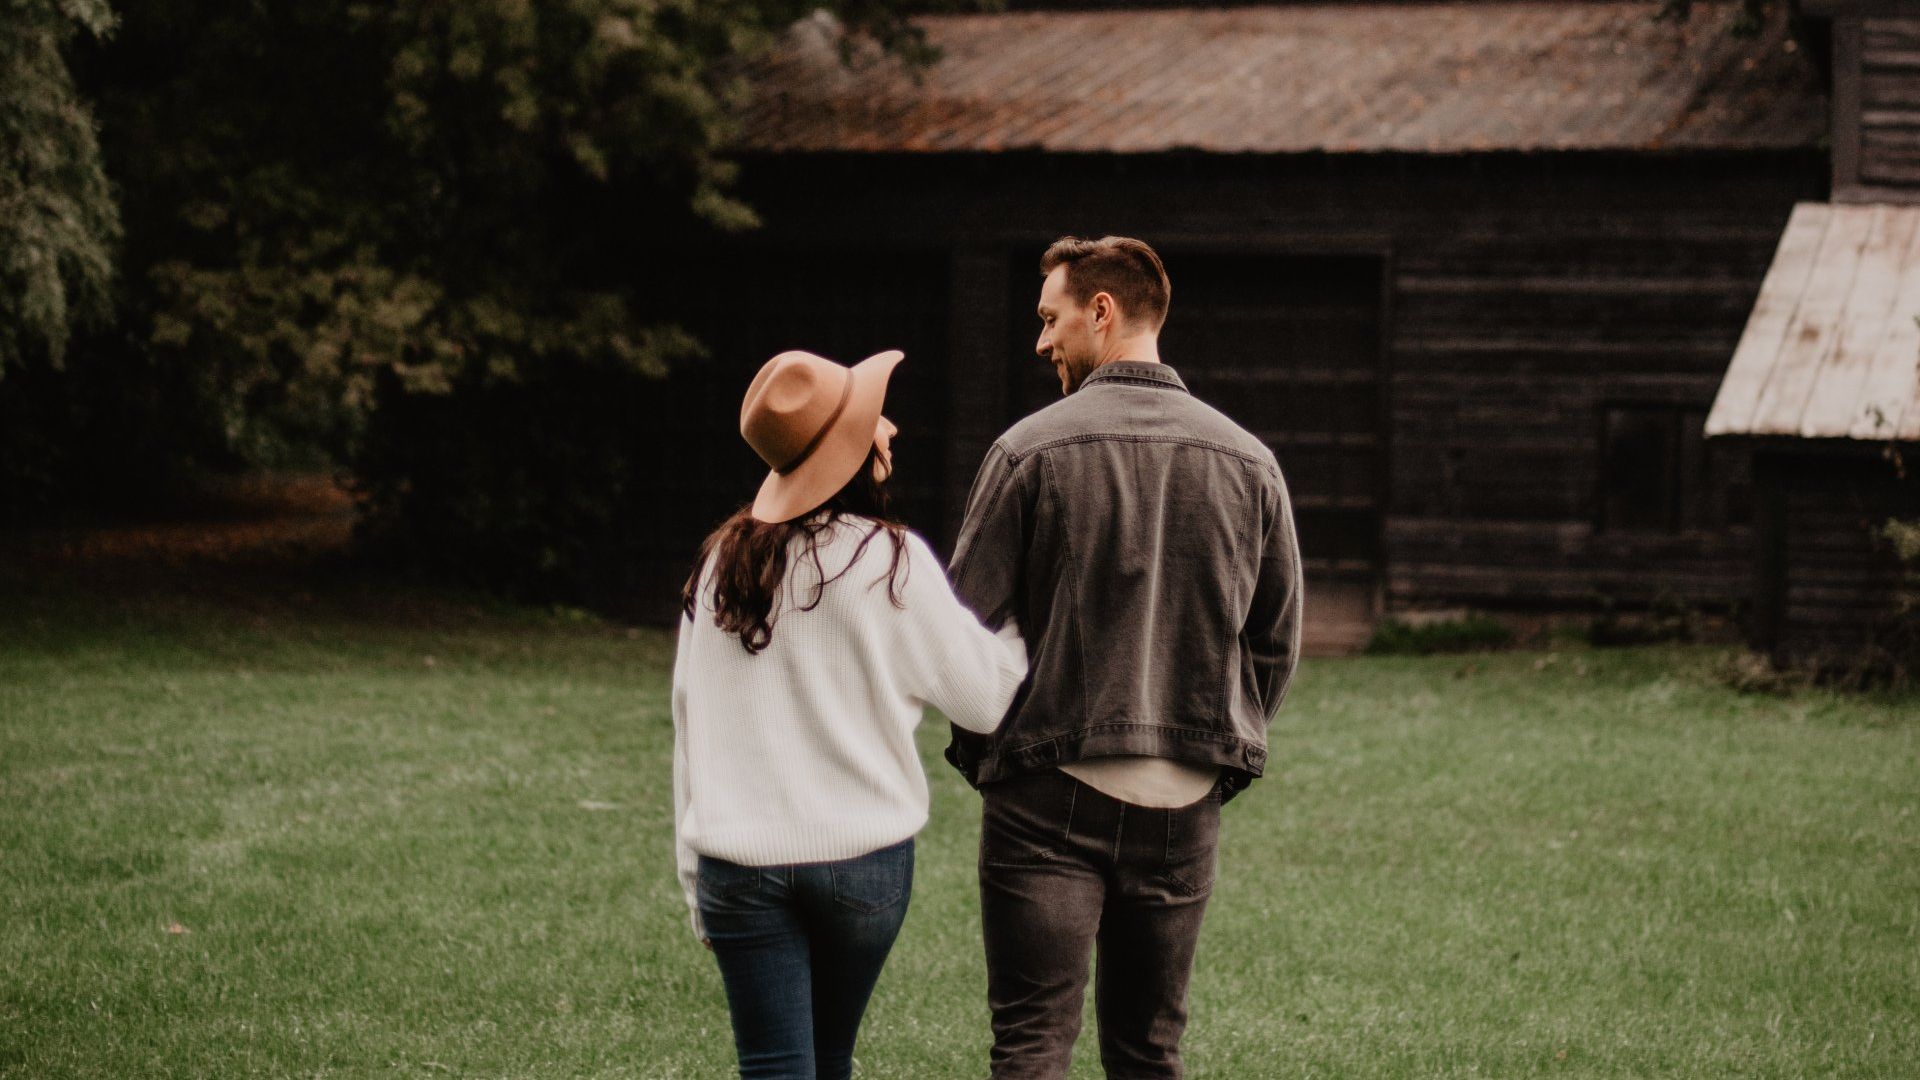 A man and a woman are walking in a field in front of a barn.